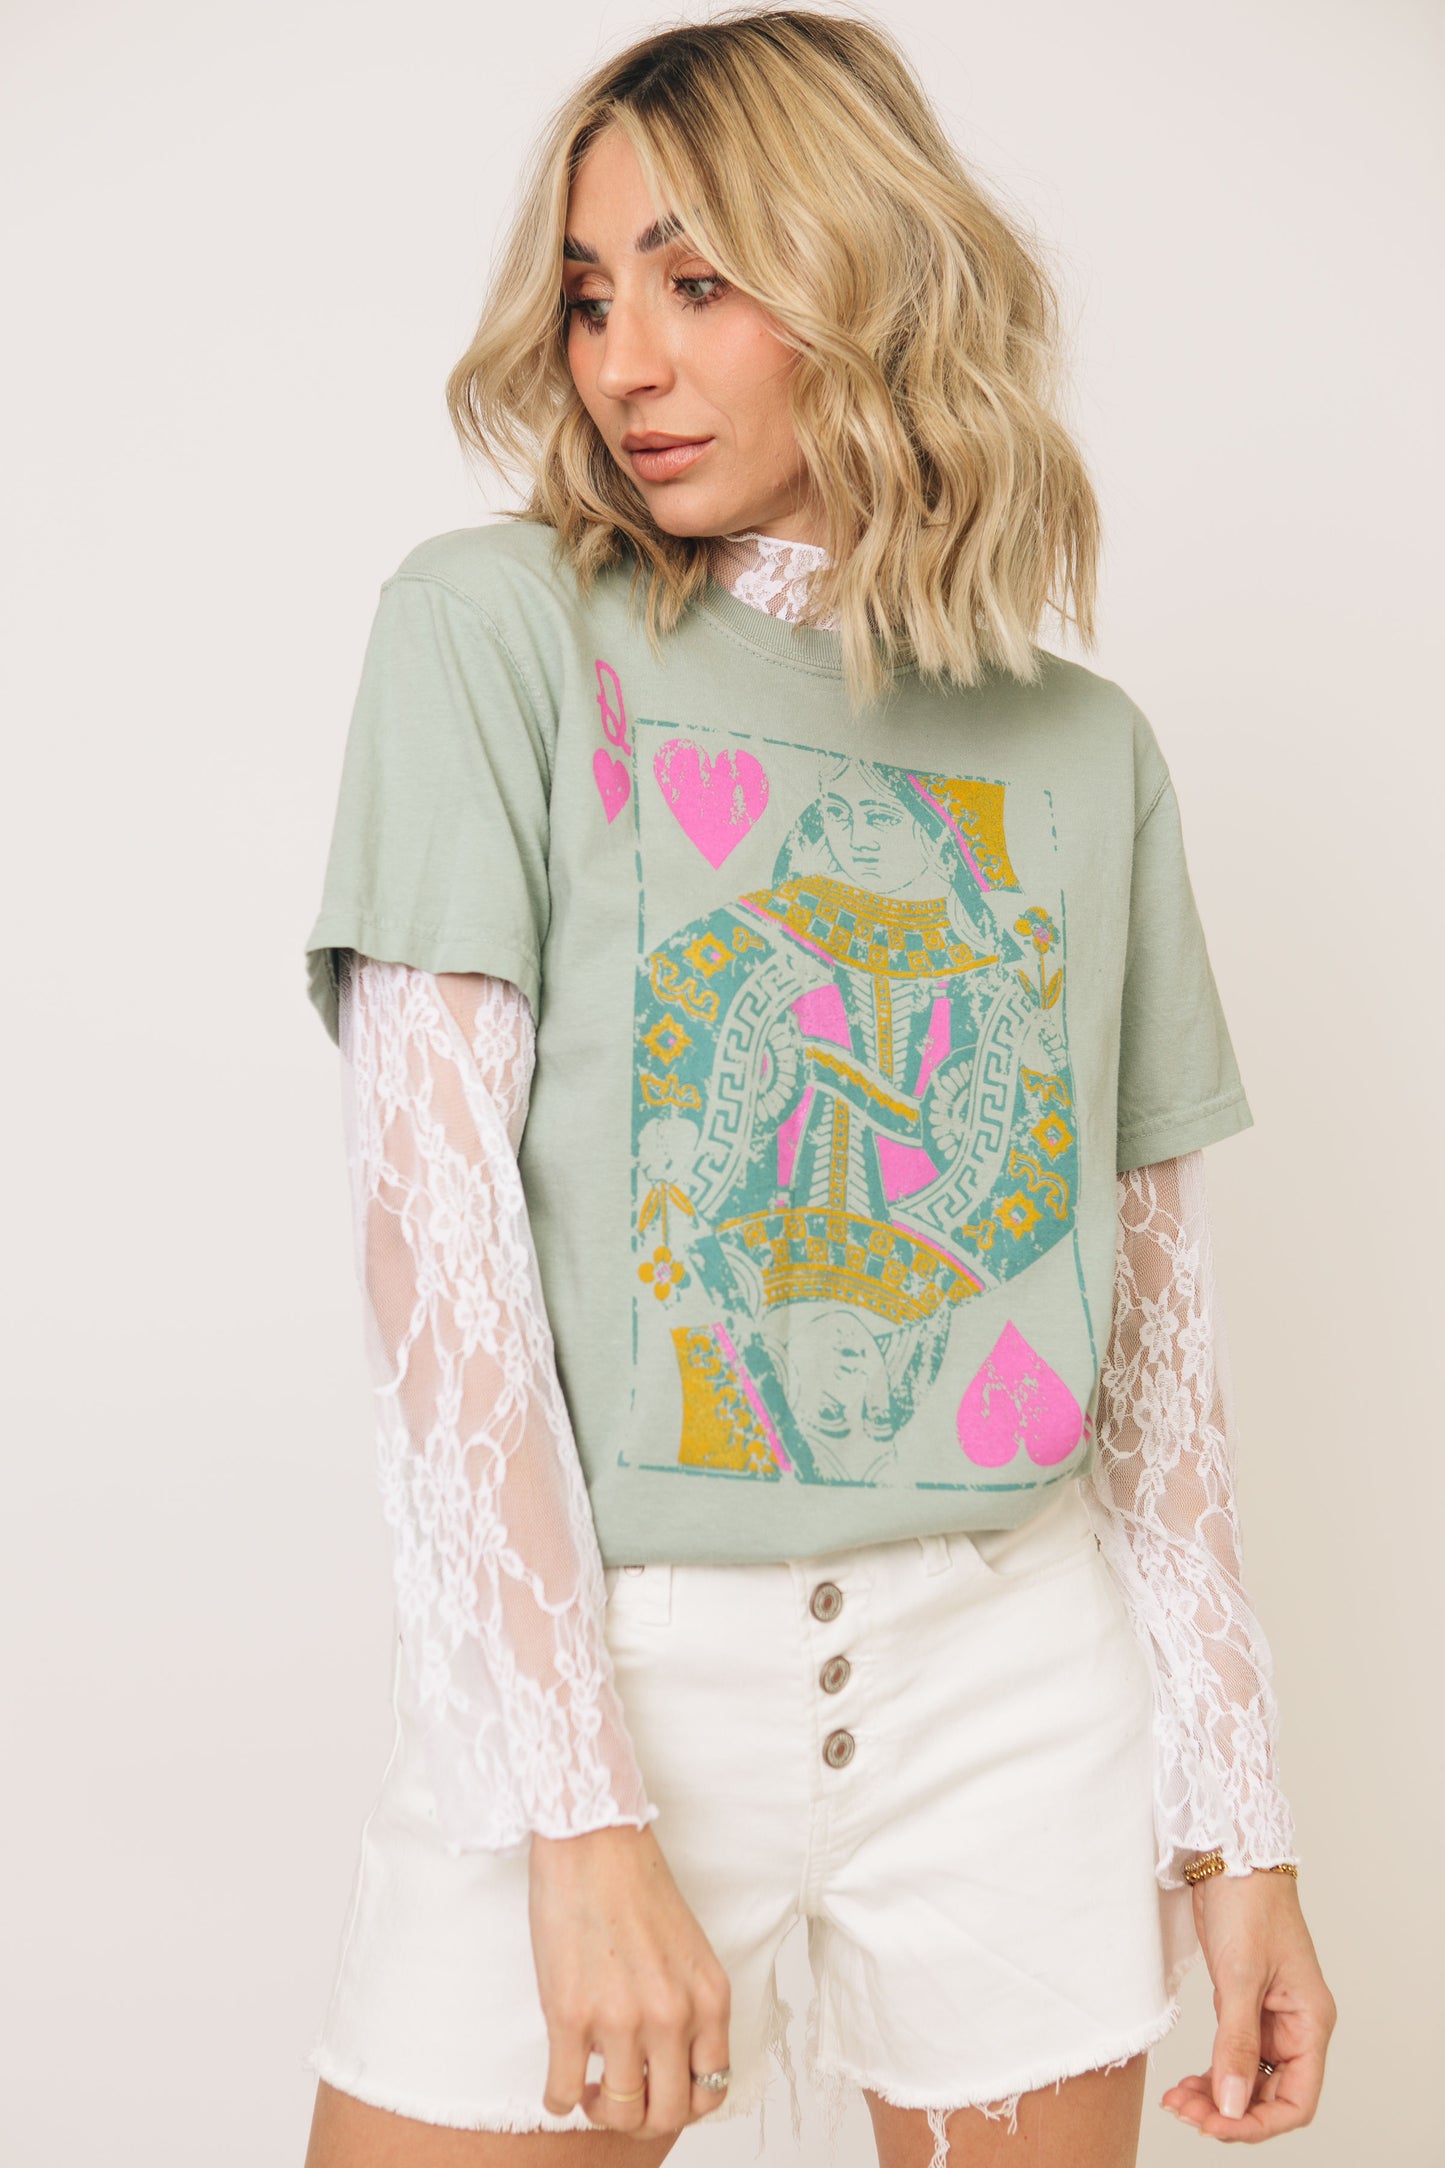 RESTOCKED - Floral Print Lace Long Sleeves Top  (S-3XL)